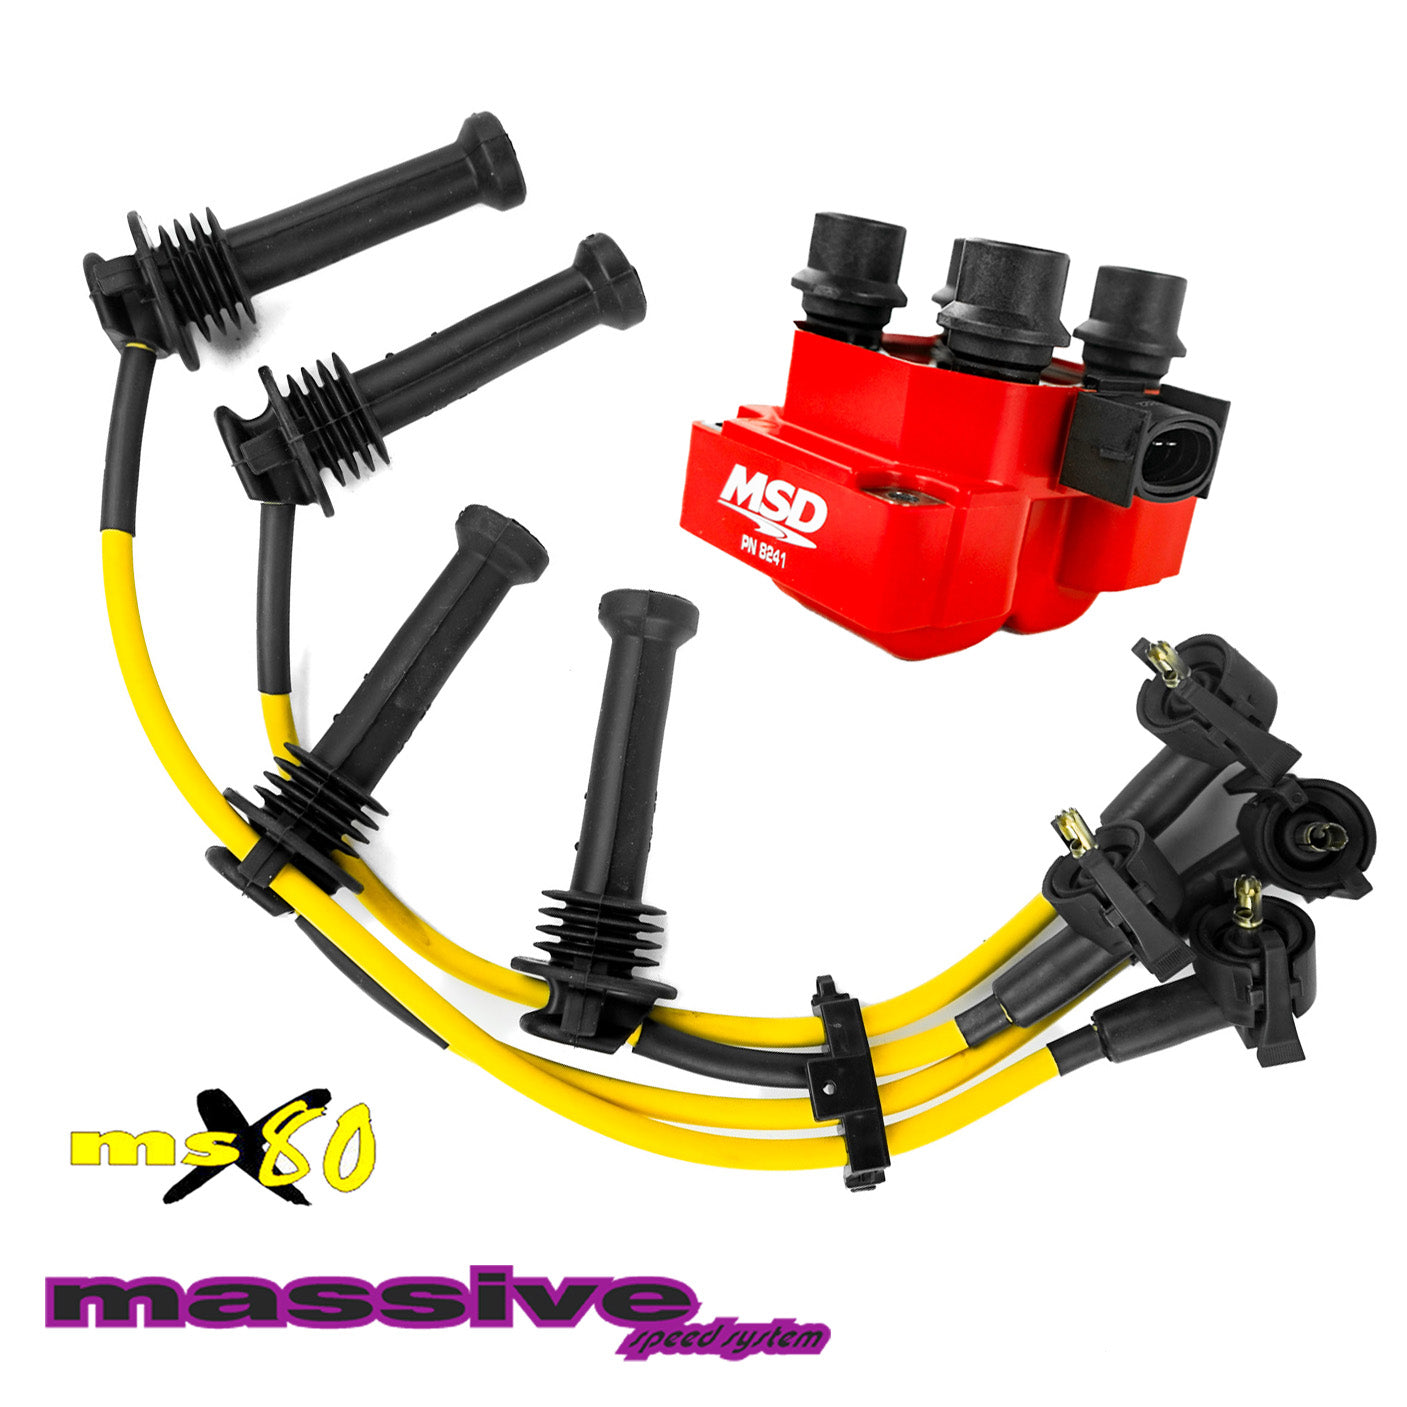 Massive ZAP-PAK Ignition Kit MSD Coil MSX80 Performance Spark Plug Wires Yellow 00-04 Ford Focus - Massive Speed System